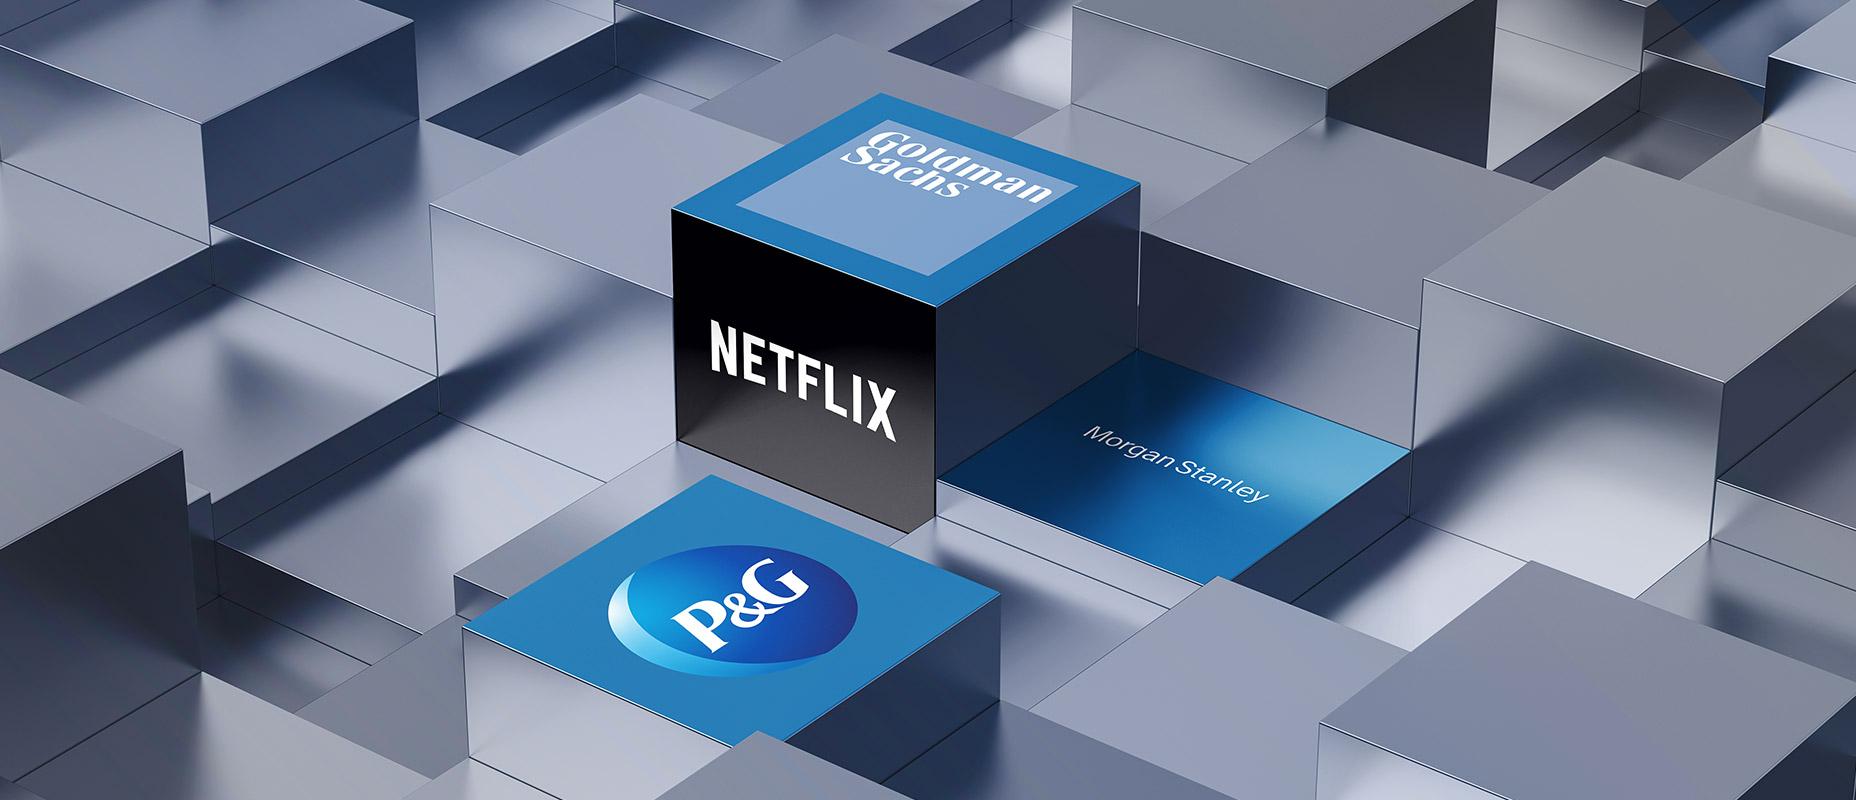 Netflix, Procter & Gamble, and American Banks: Weekly Digest (16 January — 20 January)